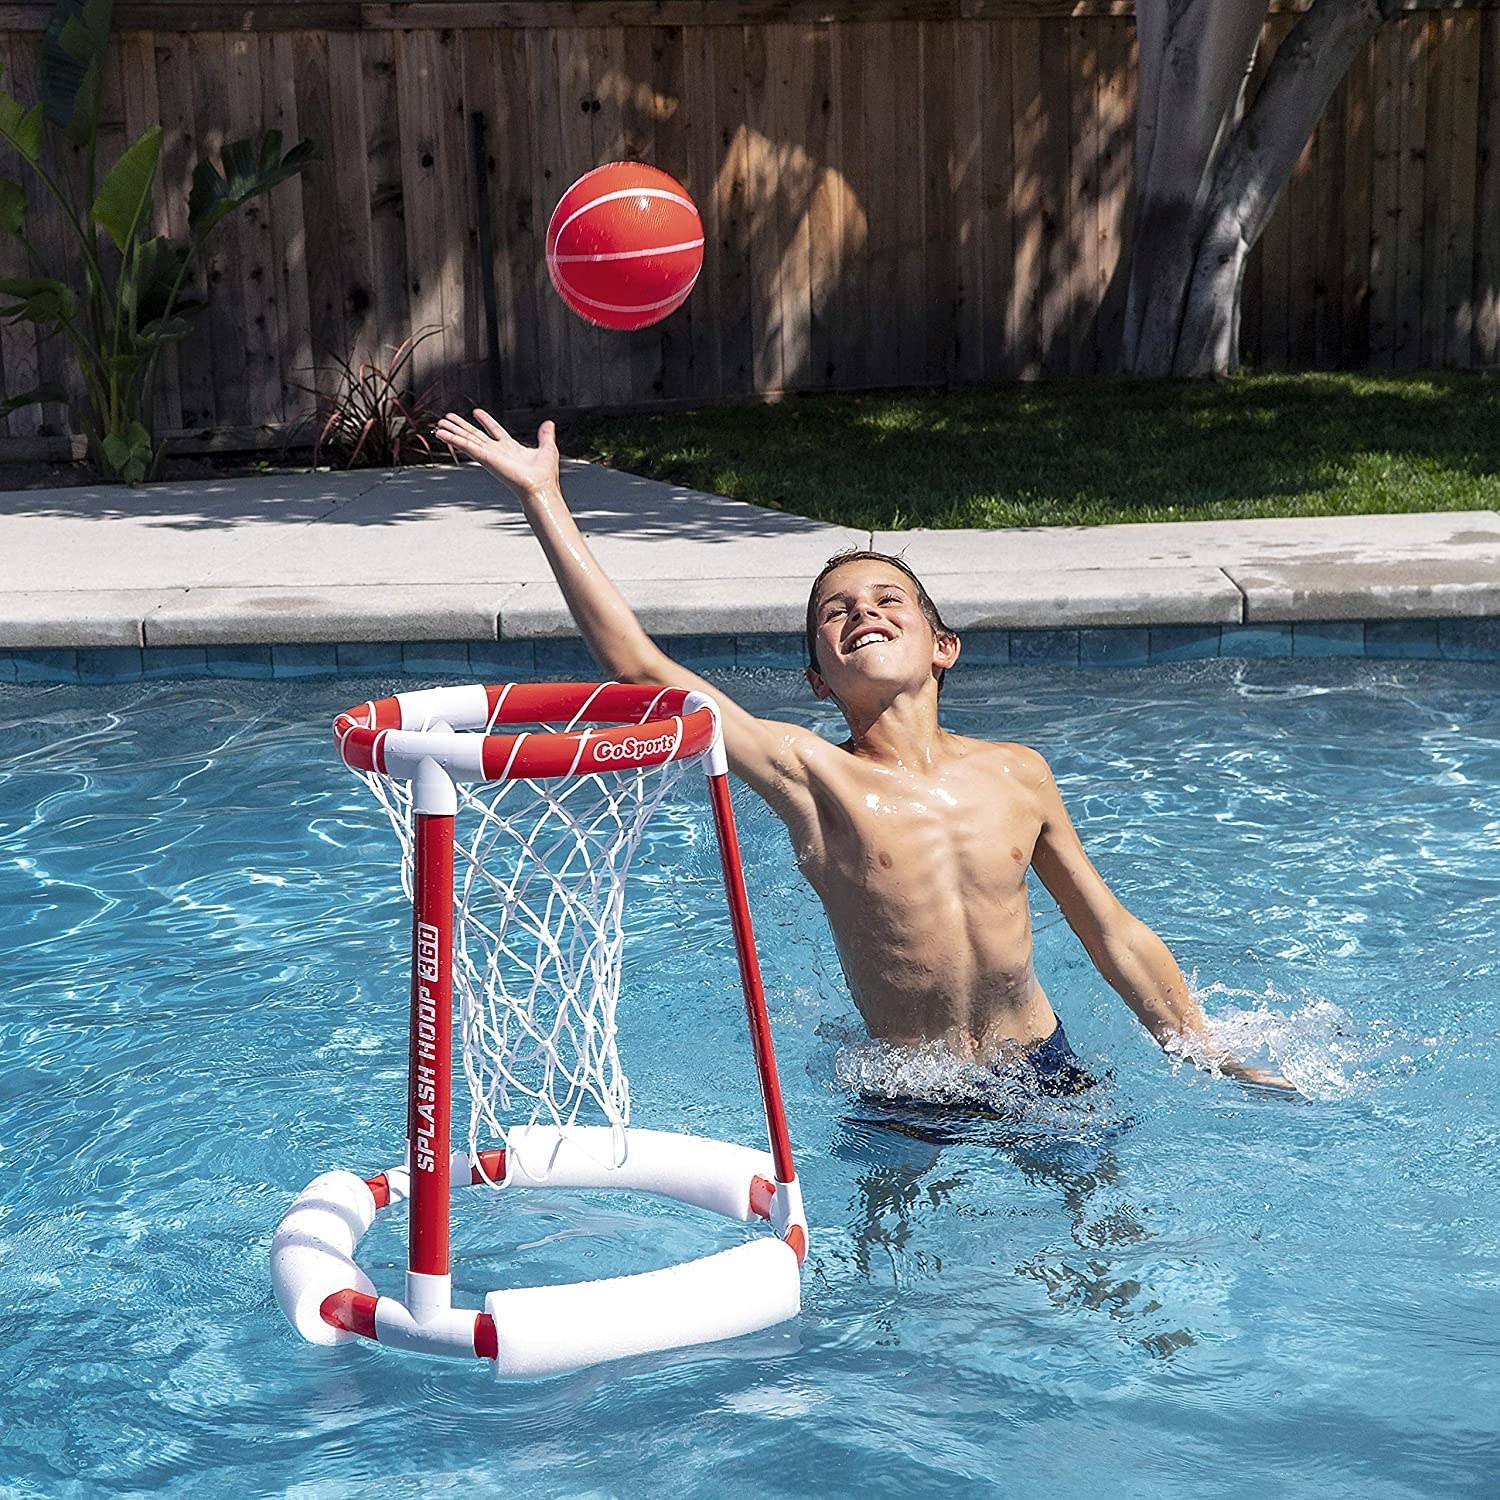 A kid throwing a ball into the hoop floating in the pool